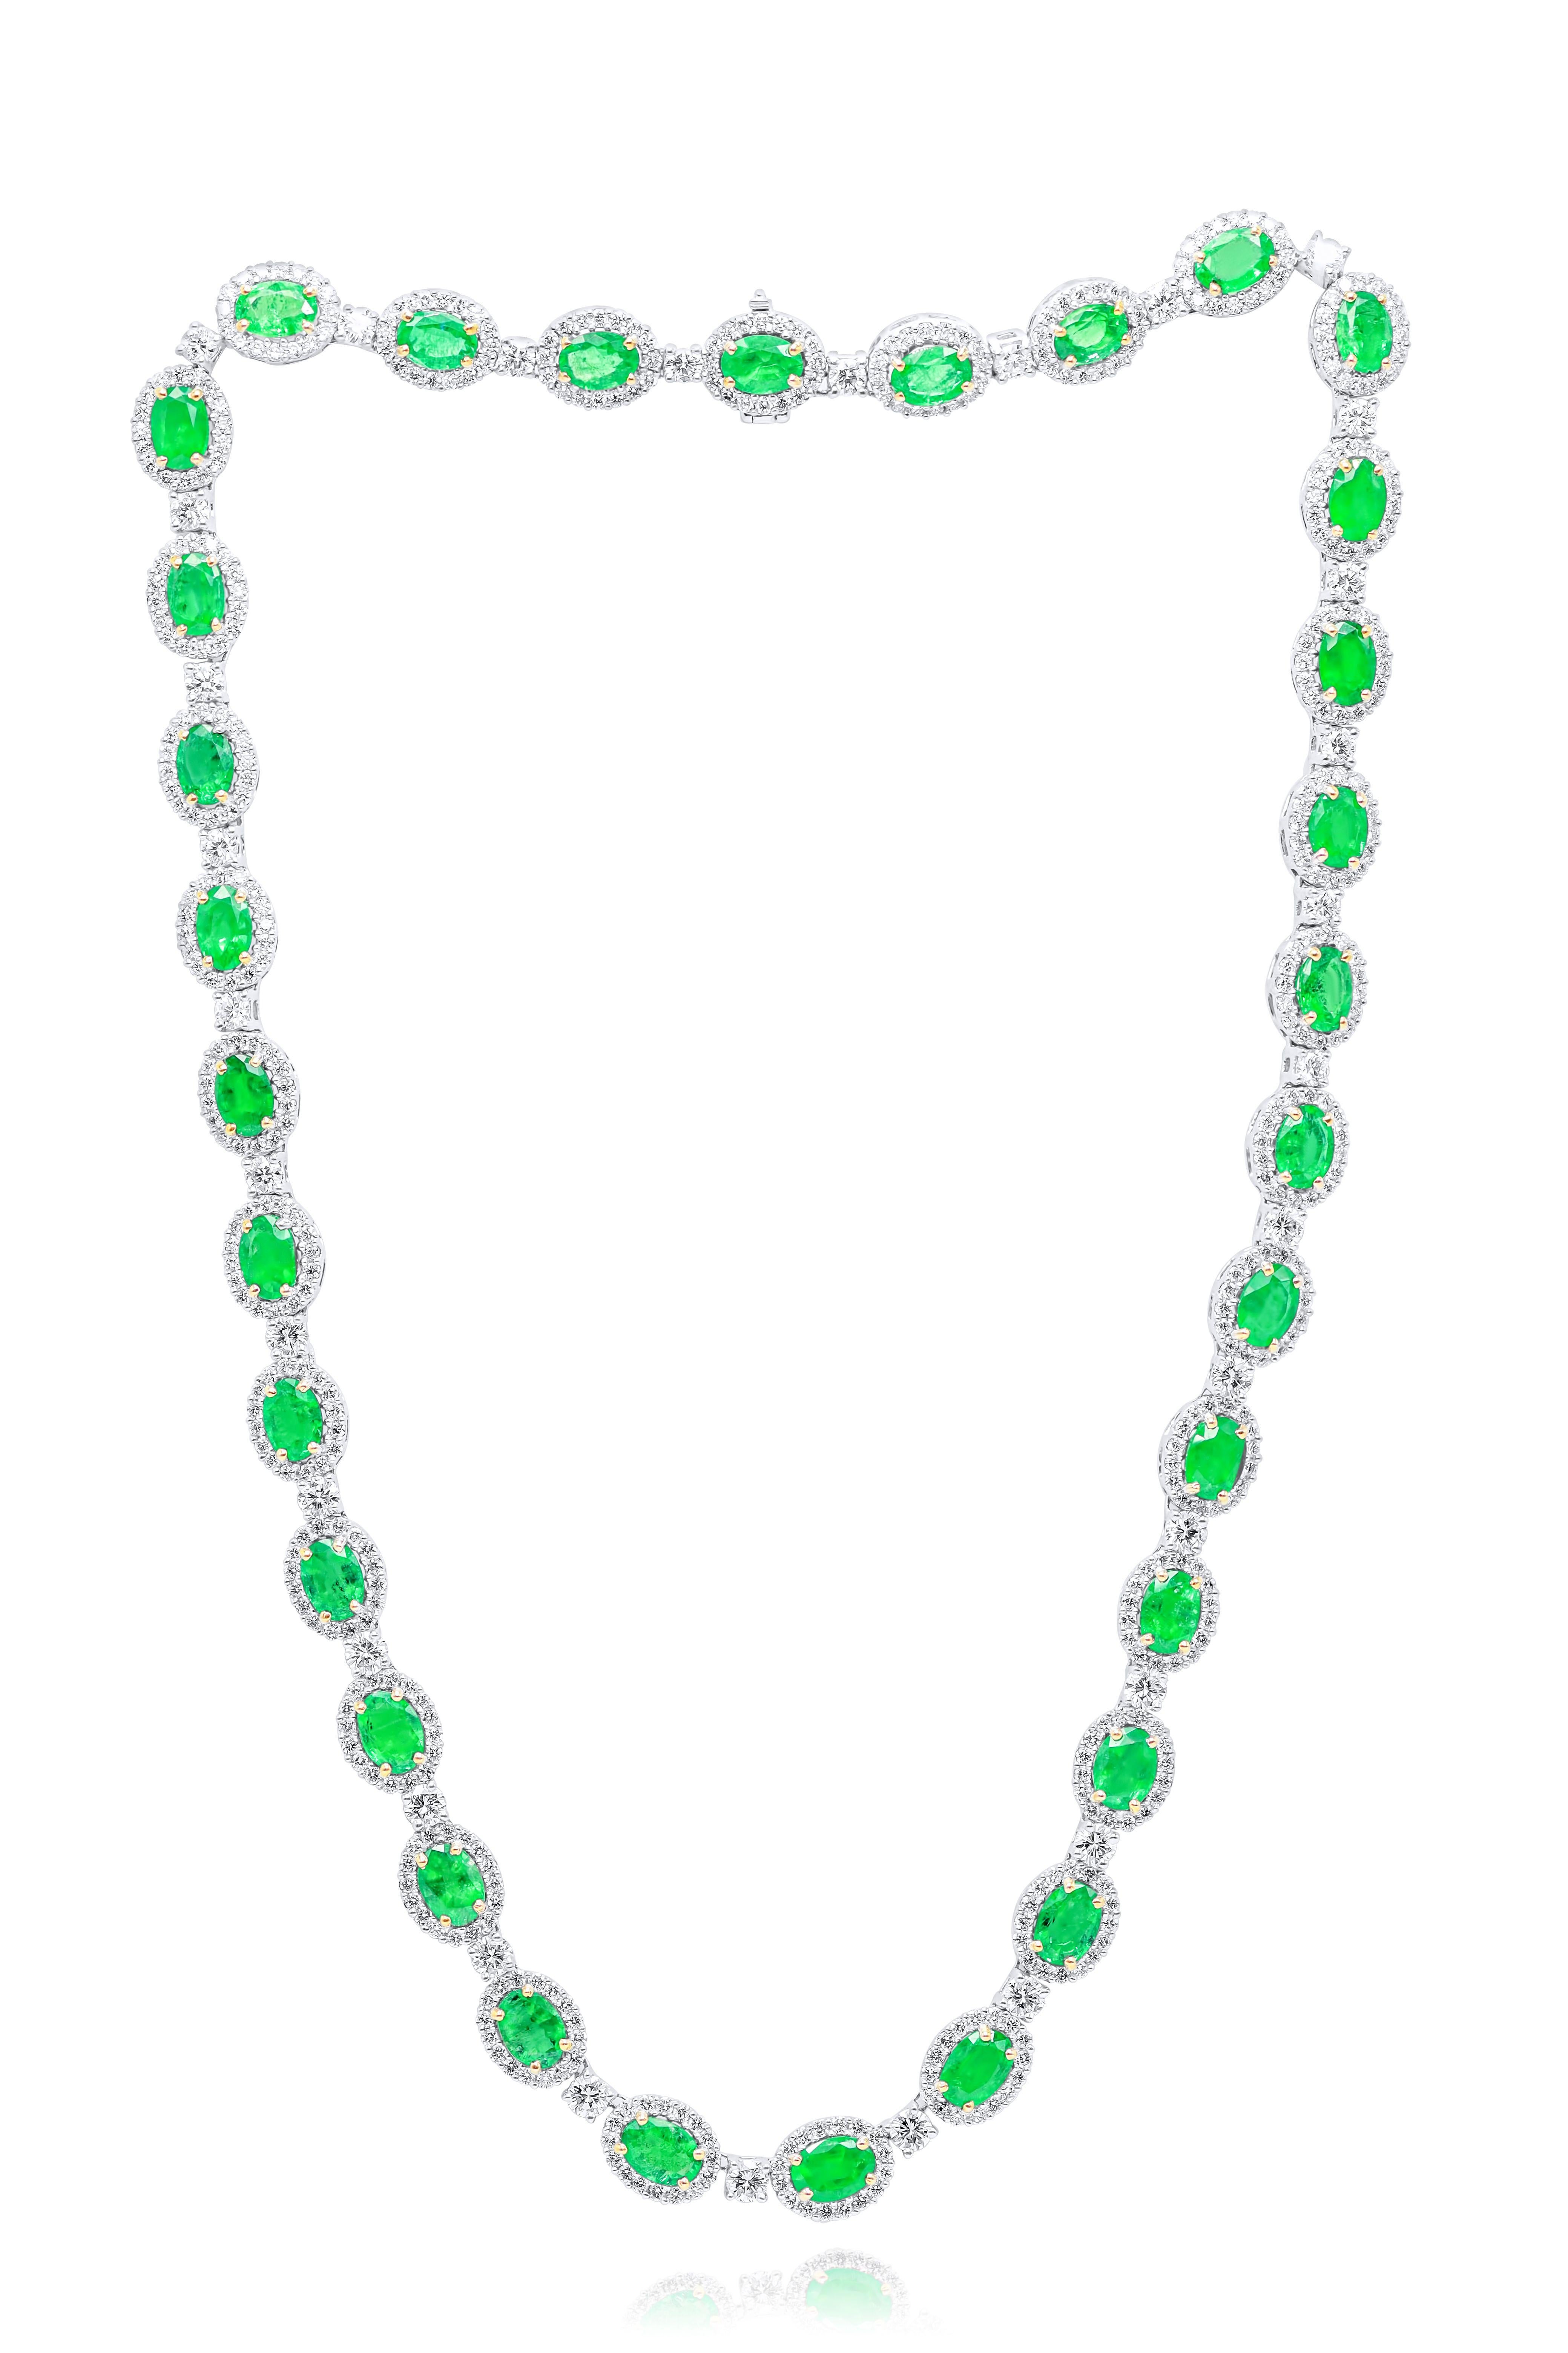 Oval Cut Diana M. 22.54 Carat Oval Emerald and Diamond Halo Necklace in White Gold For Sale